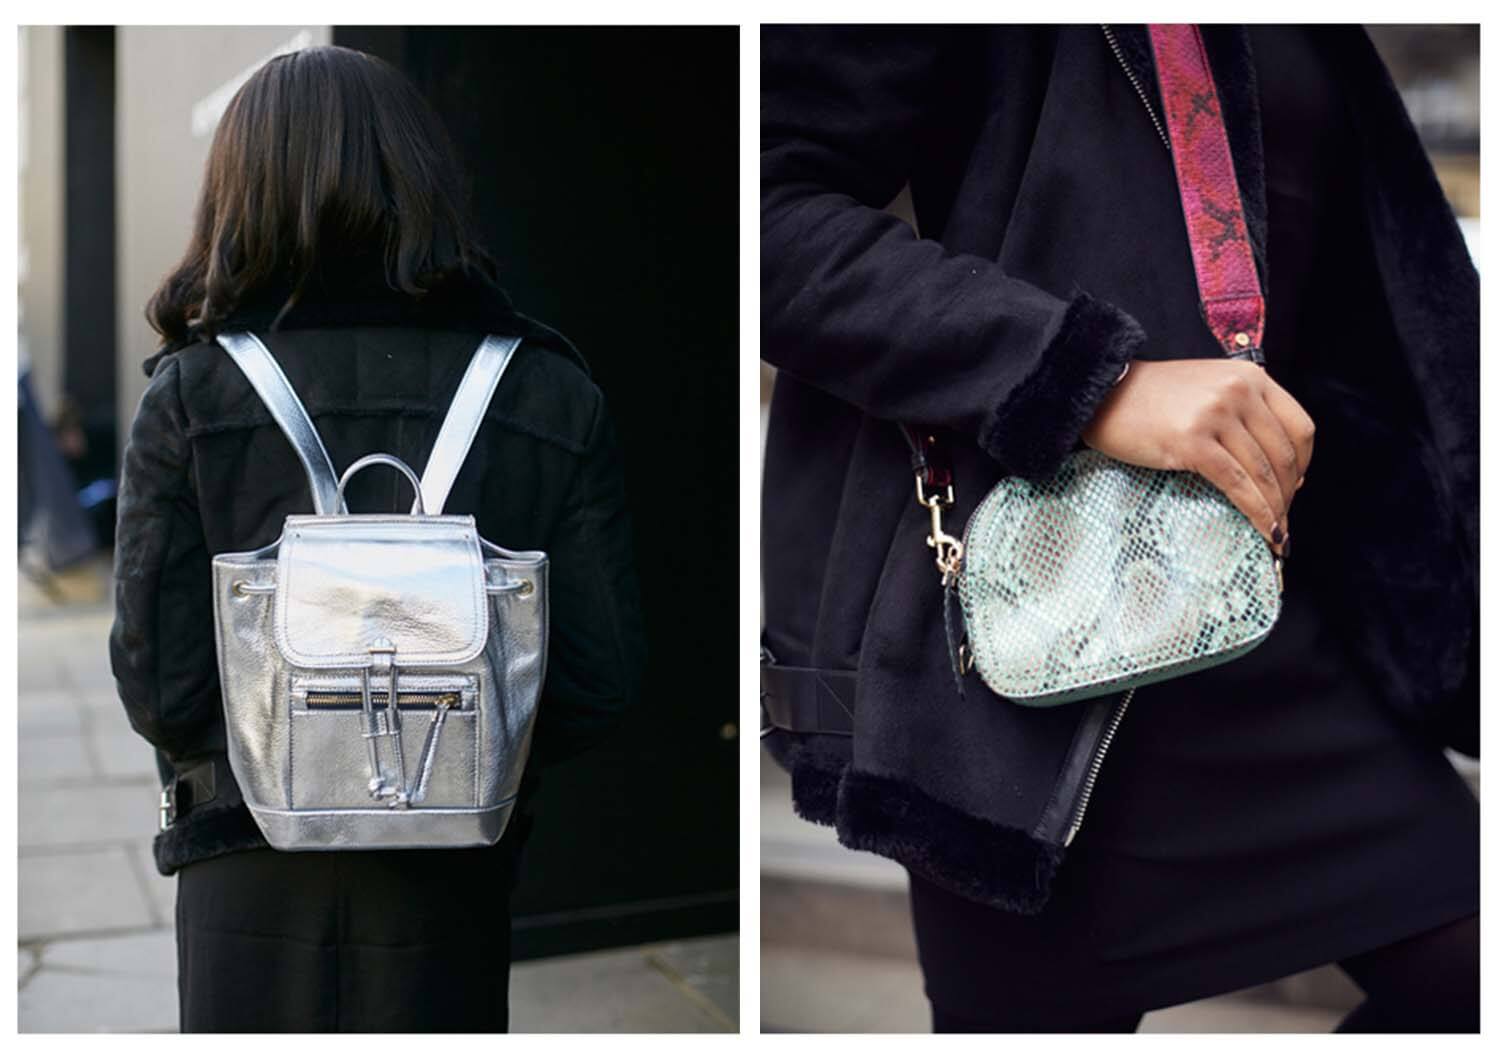 Small is the new big as micro bags takes over the high street, Handbags